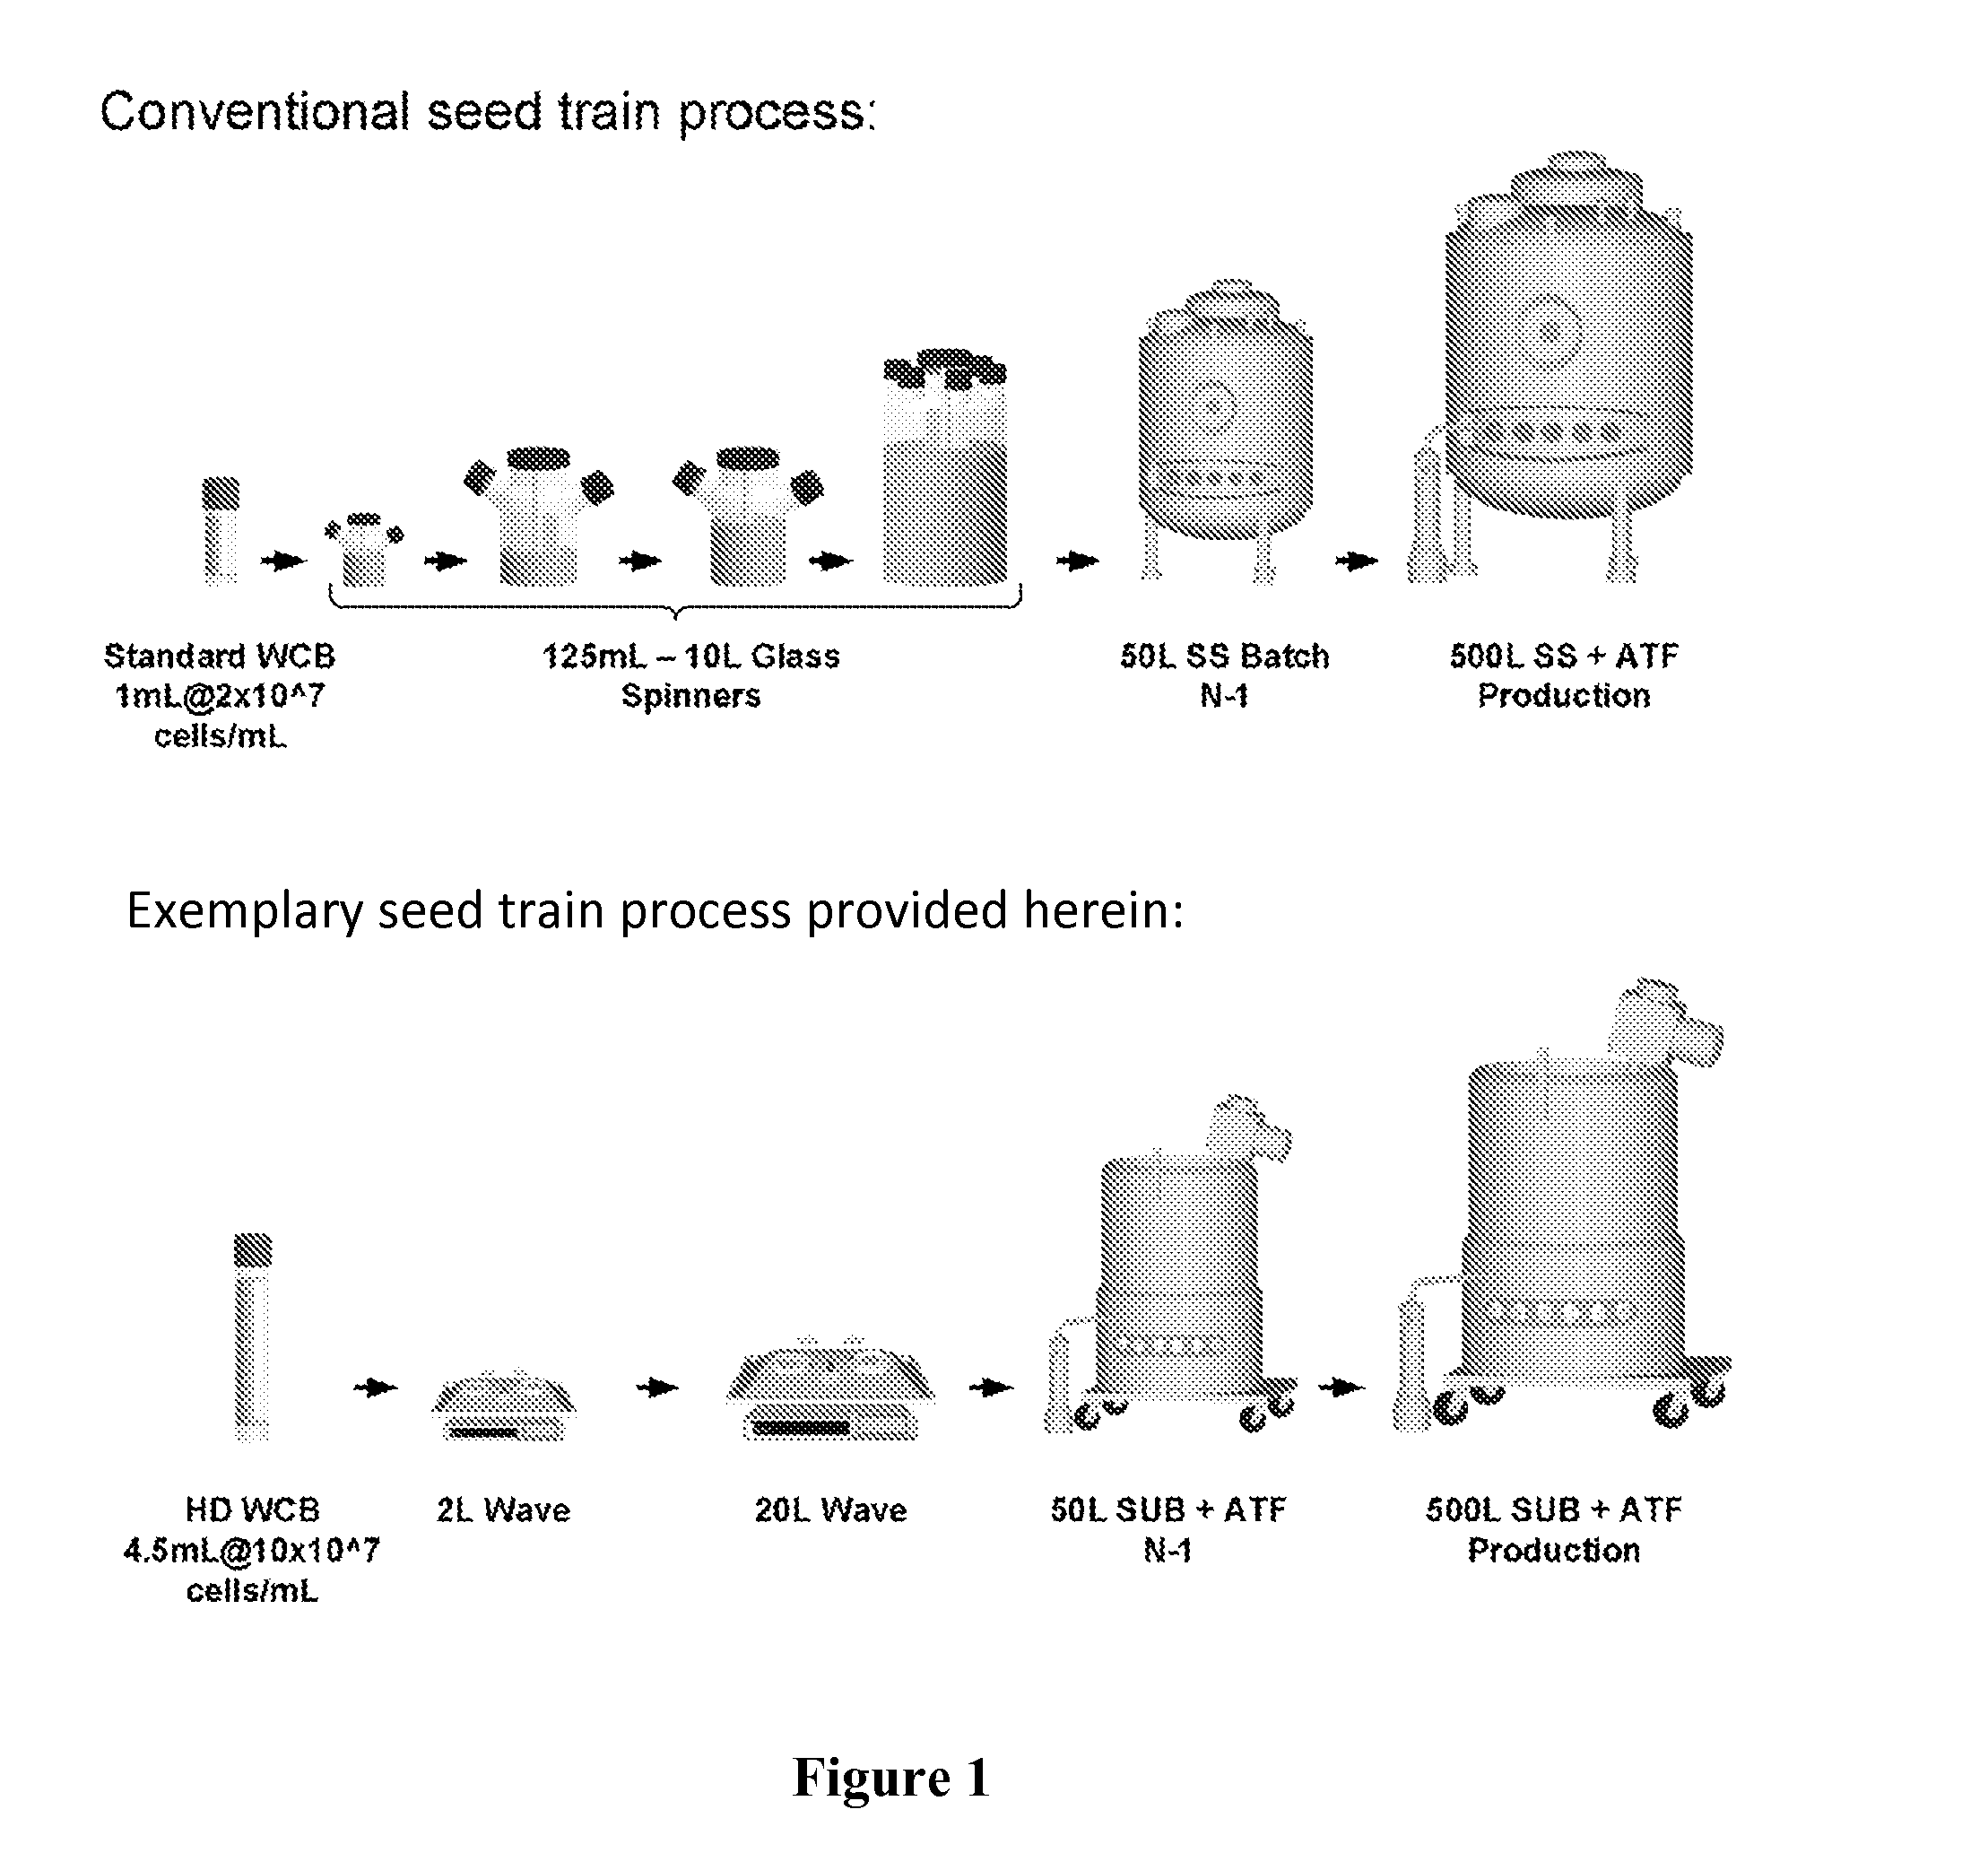 Seed Train Processes and Uses Thereof